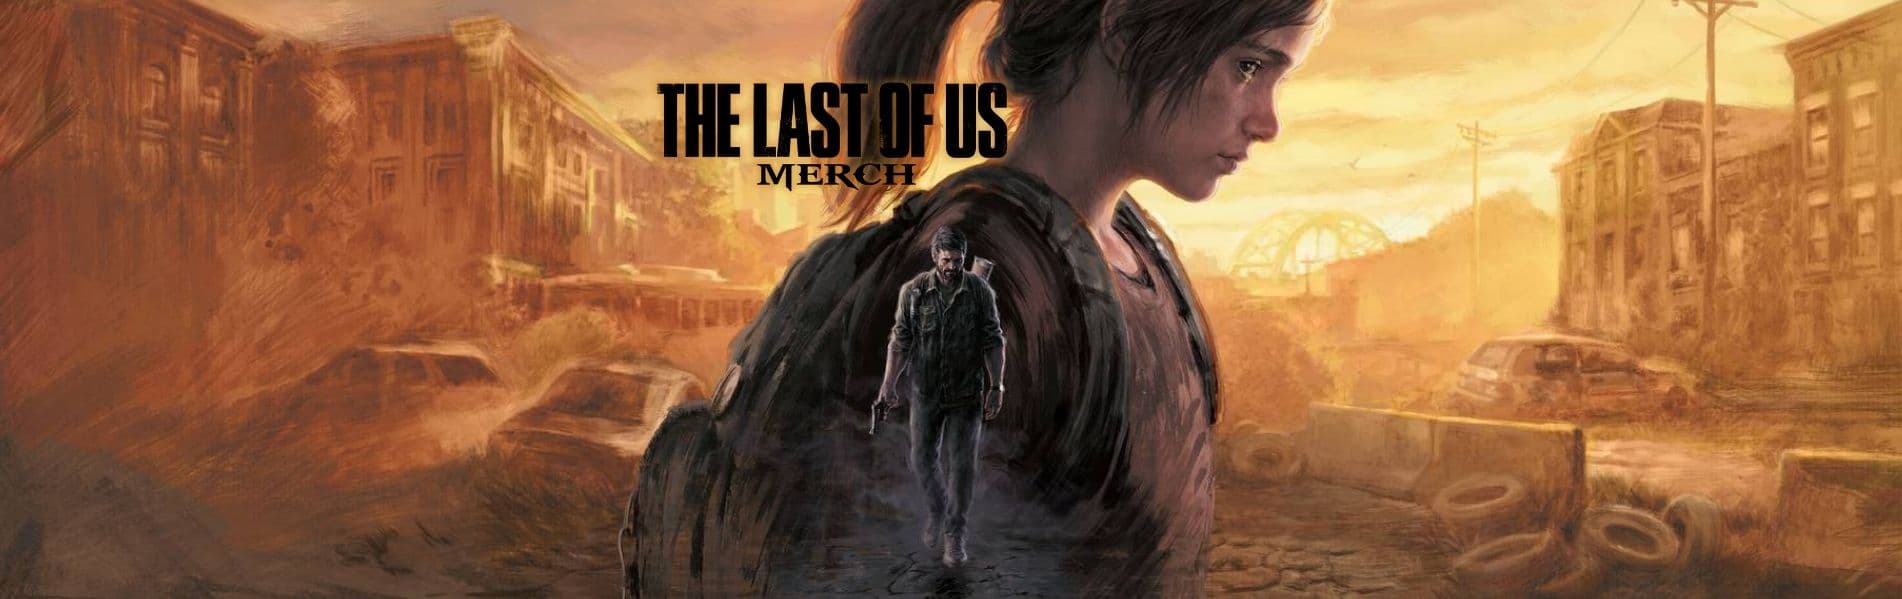 The Last Of Us Merch Banner 2